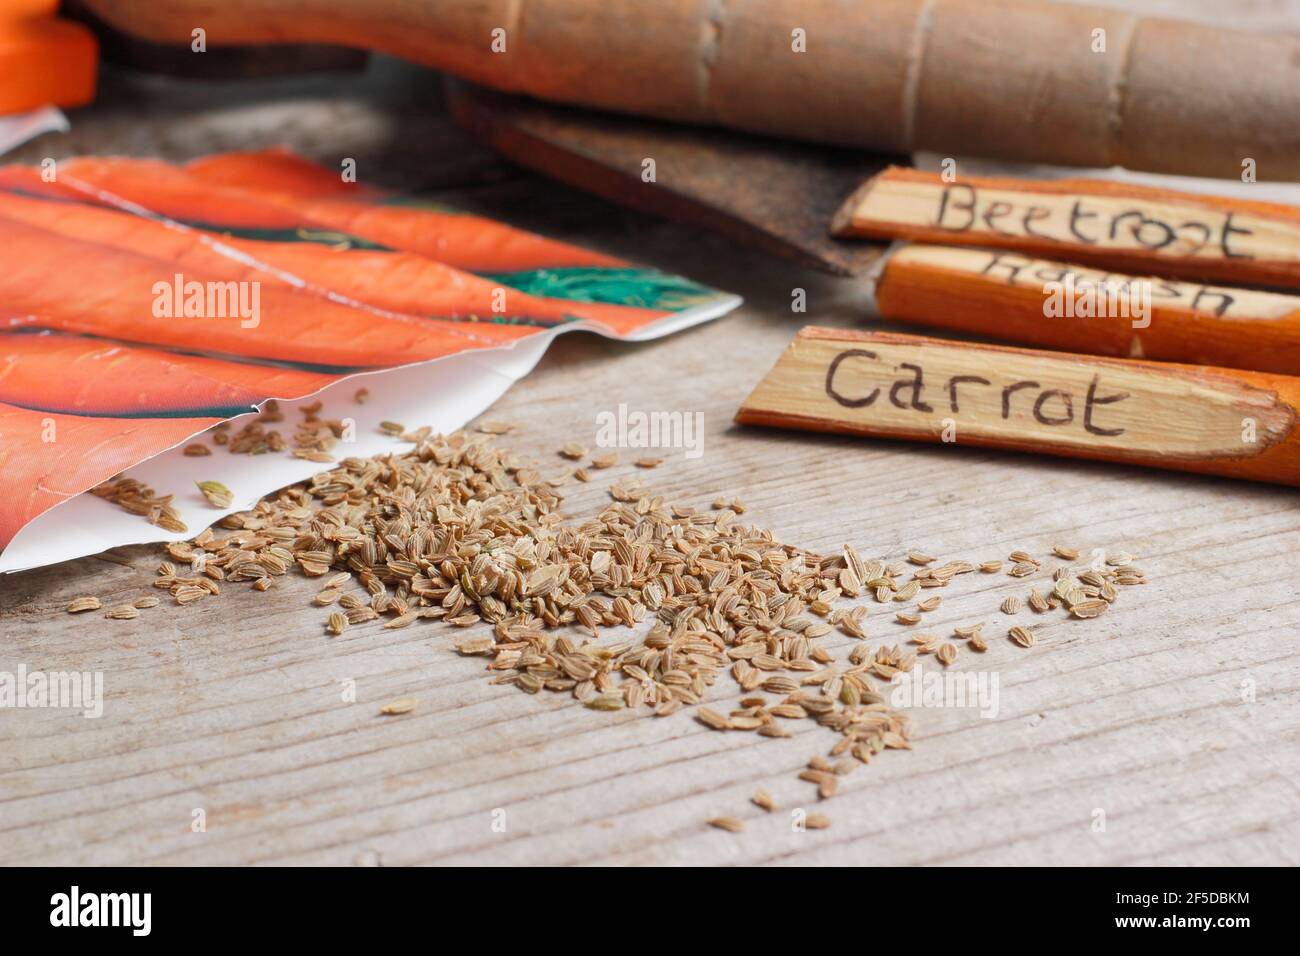 Daucus carota. Carrot seed ready for sowing. UK Stock Photo